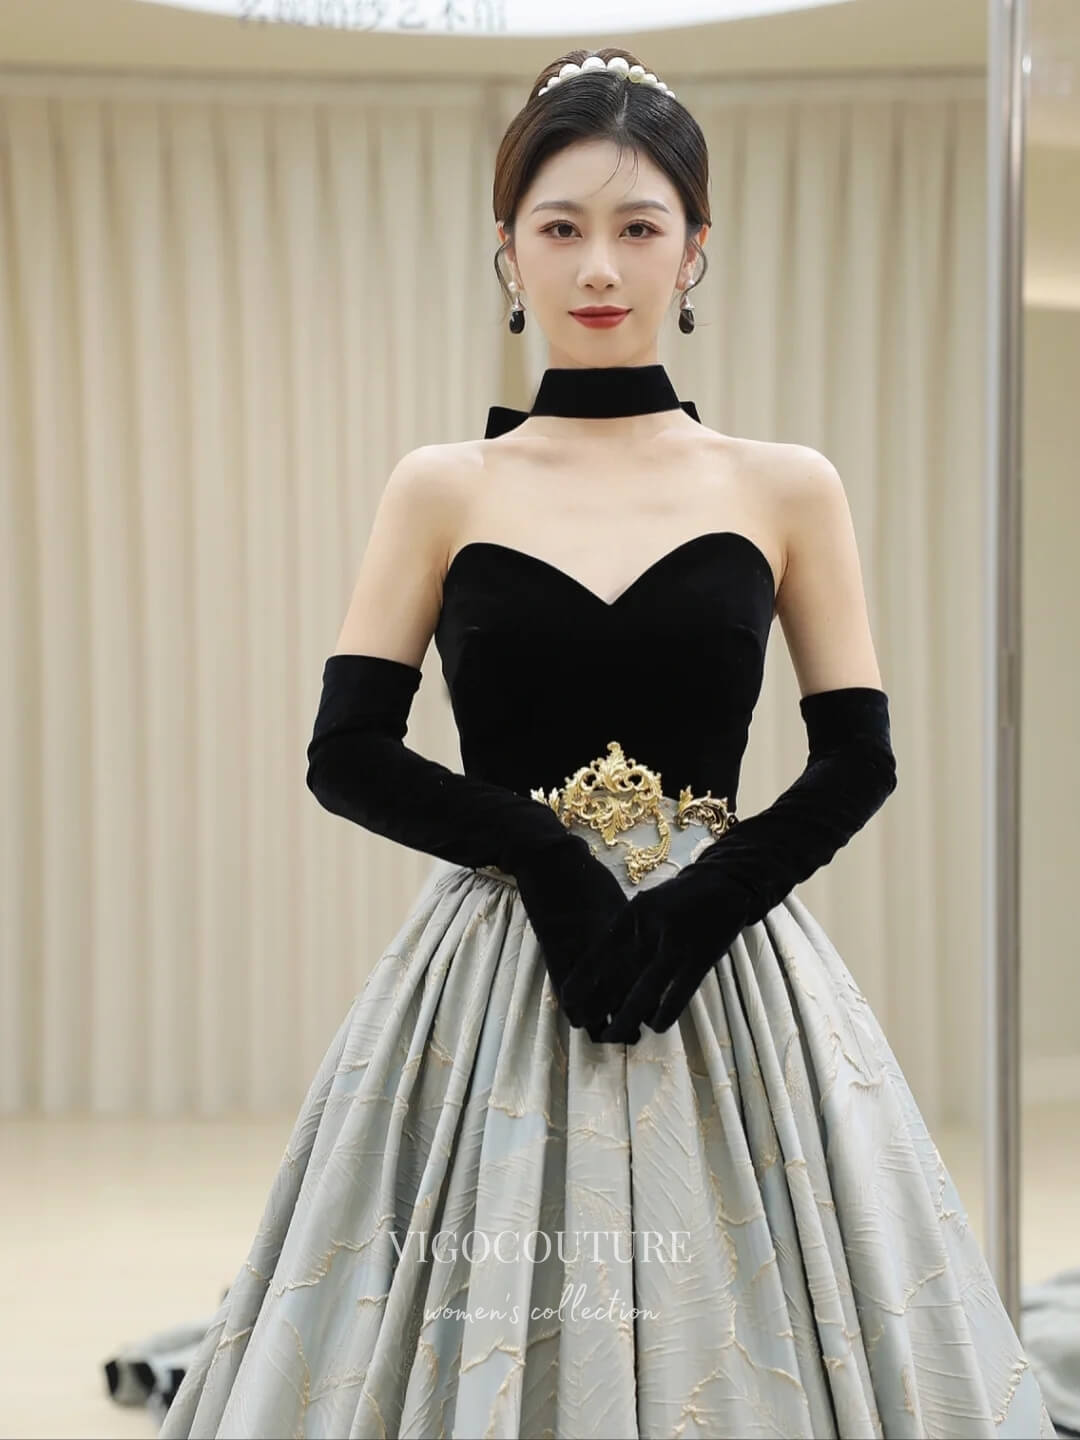 Miss Beauty Pageant Queen Contest in Asian Gown Stock Photo - Image of  elegant, dress: 125323114